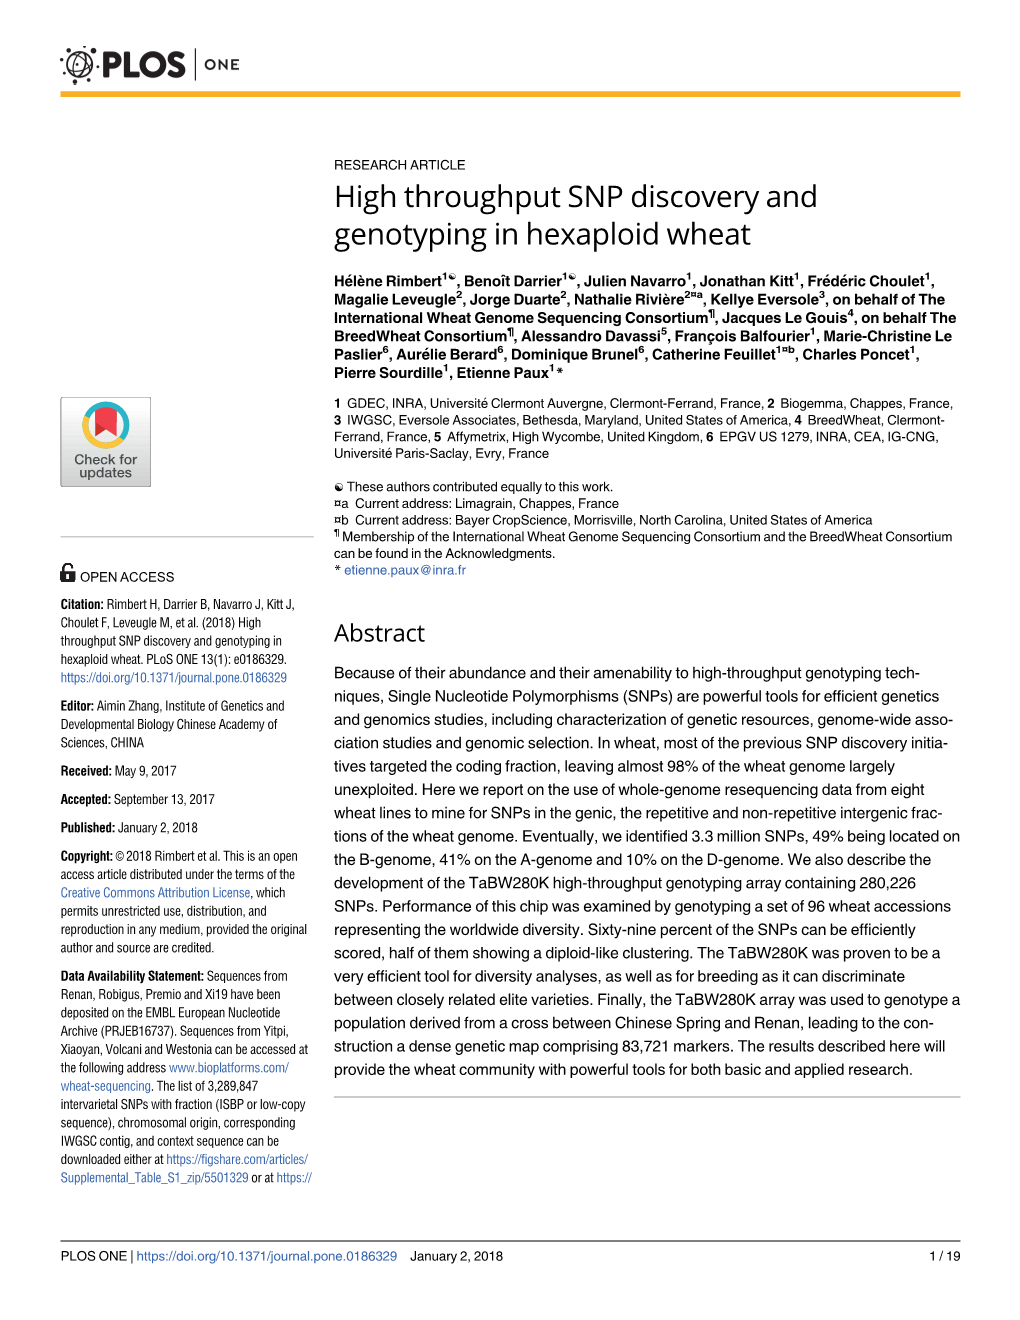 High Throughput SNP Discovery and Genotyping in Hexaploid Wheat